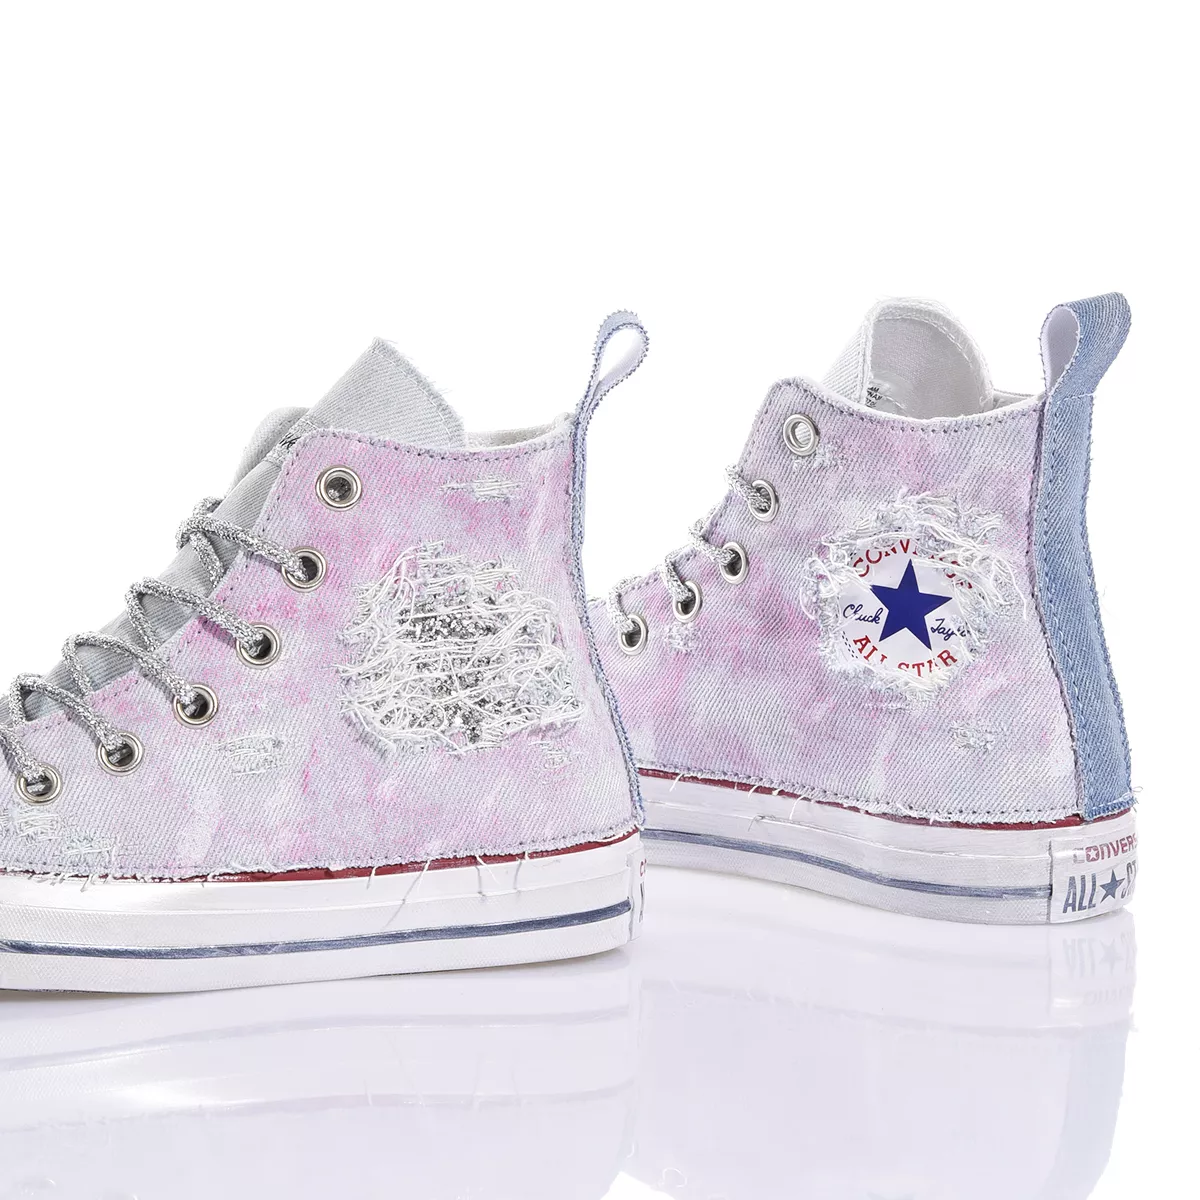 Converse Denim Glitter Chuck Taylor High Top Washed-out, Glitter, Special